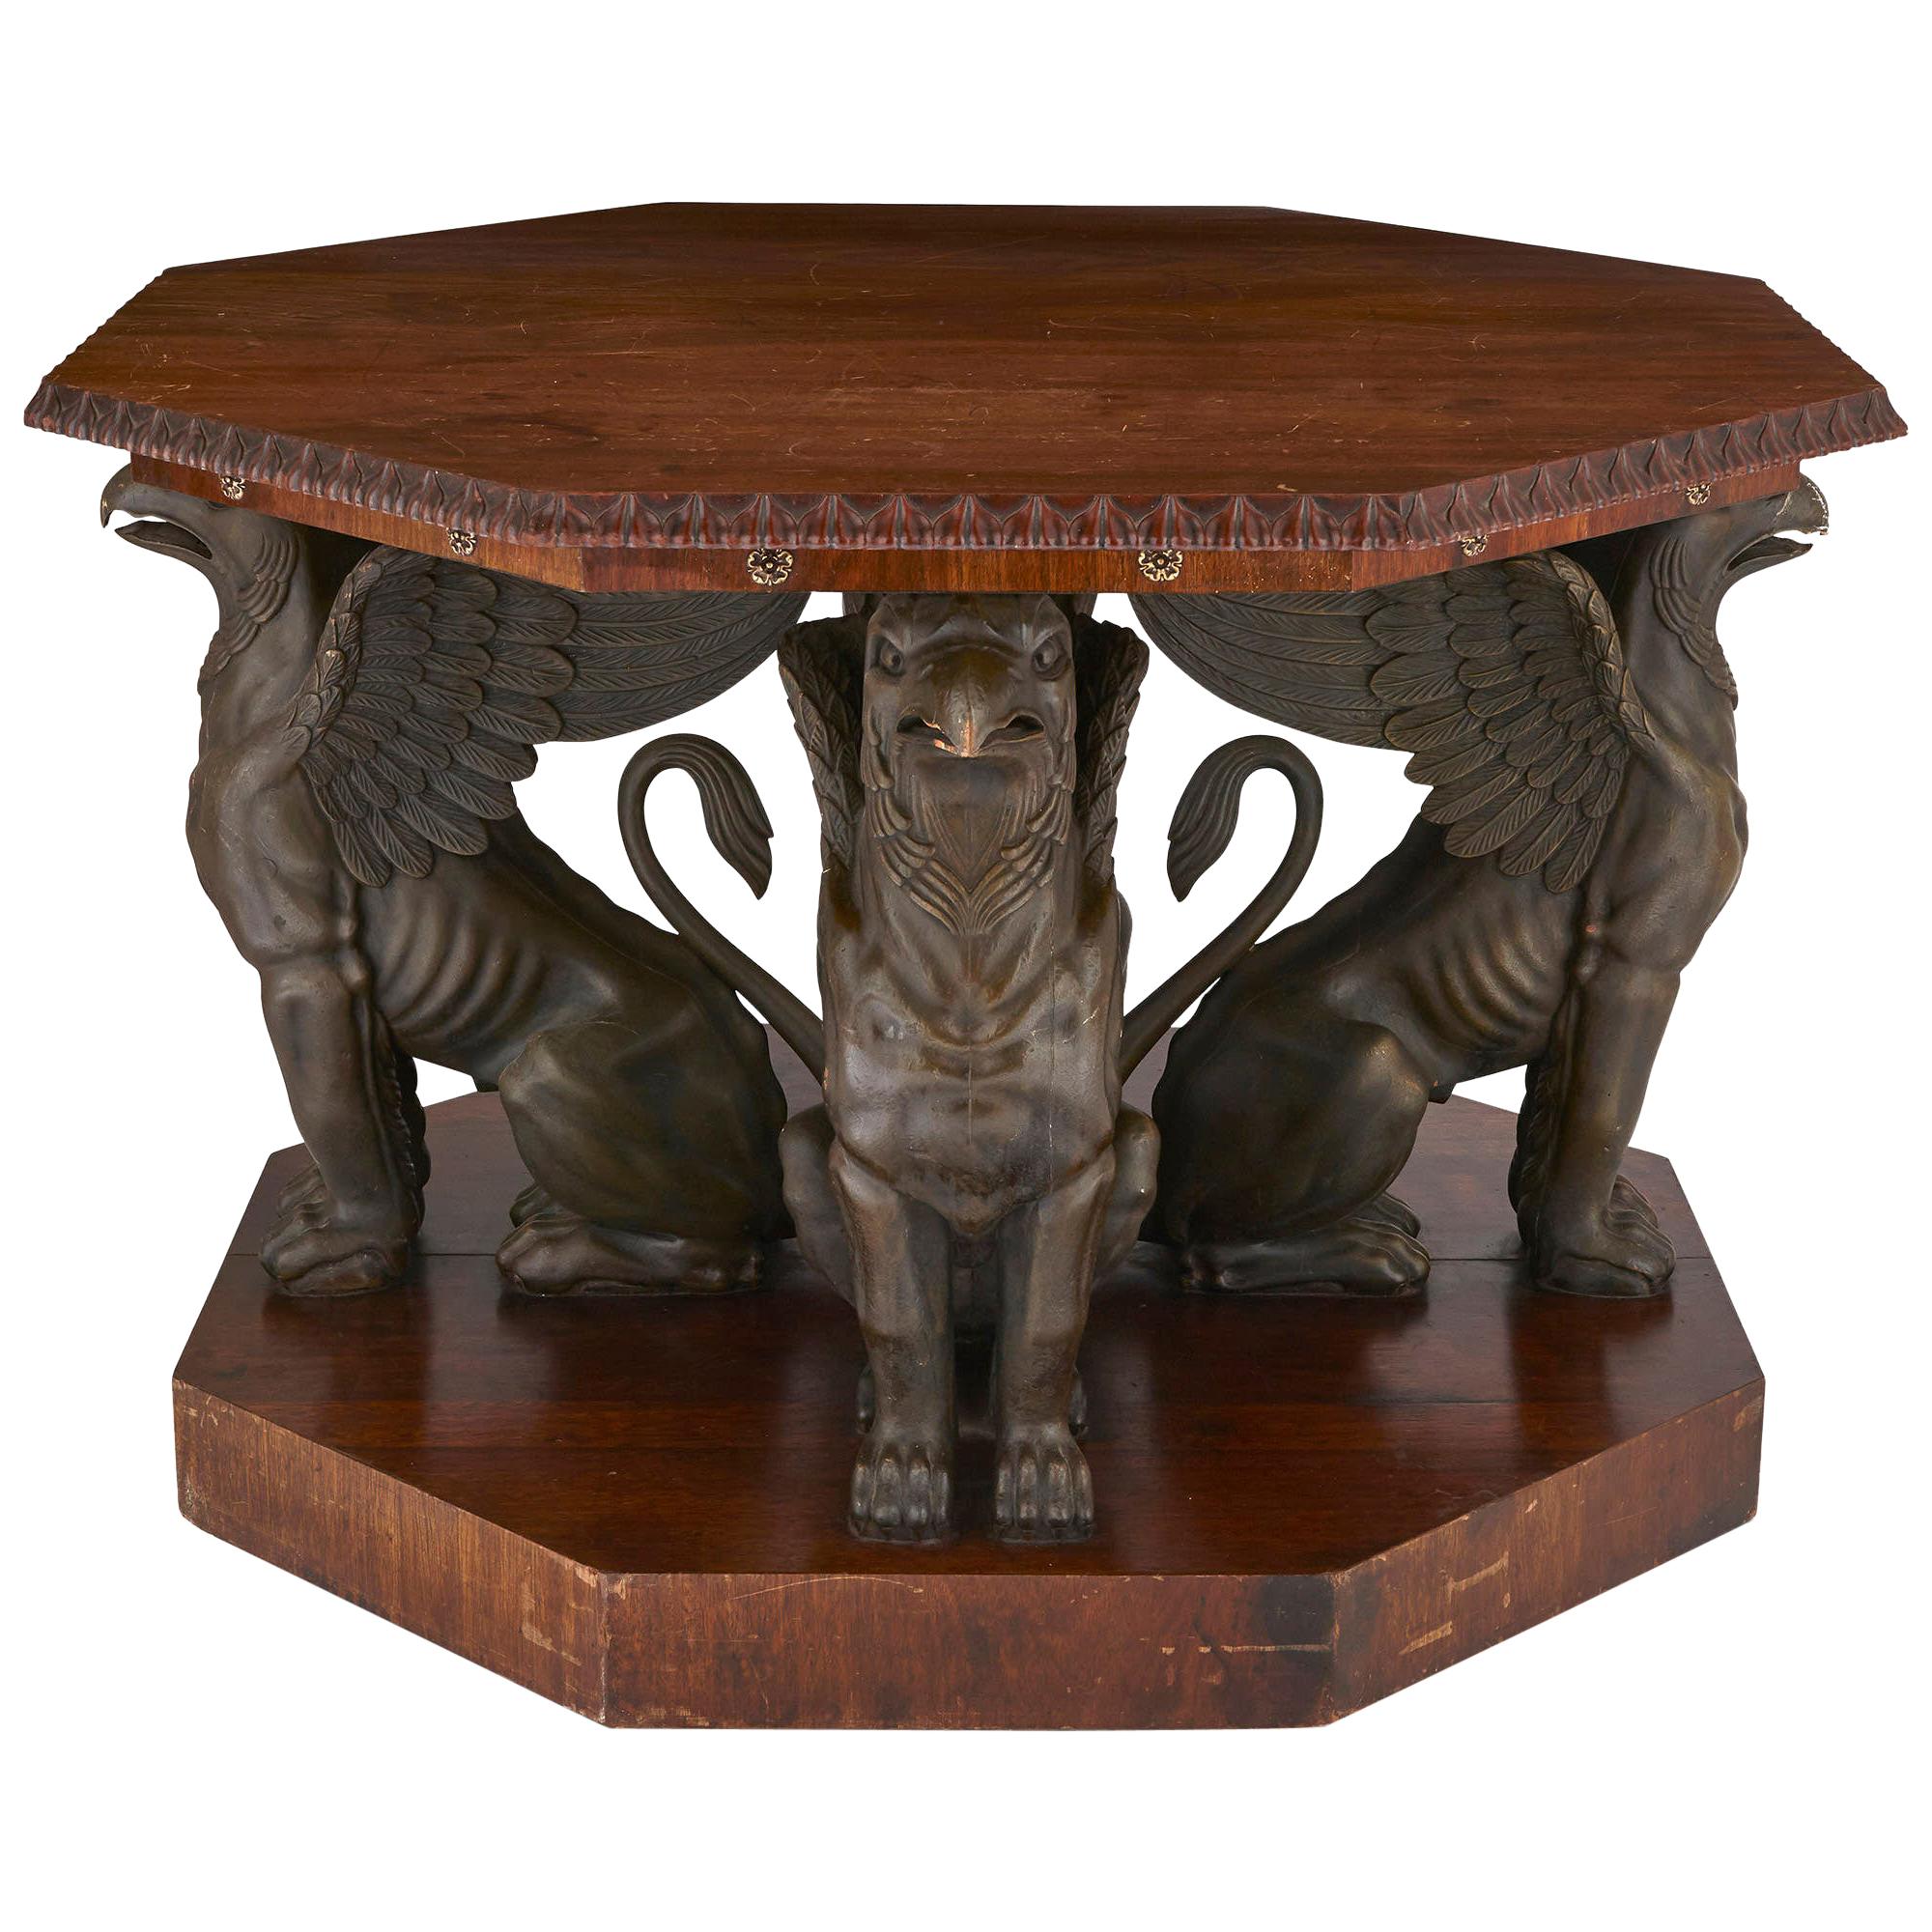 Mahogany Octagonal Table with Bronzed Metal Griffins For Sale